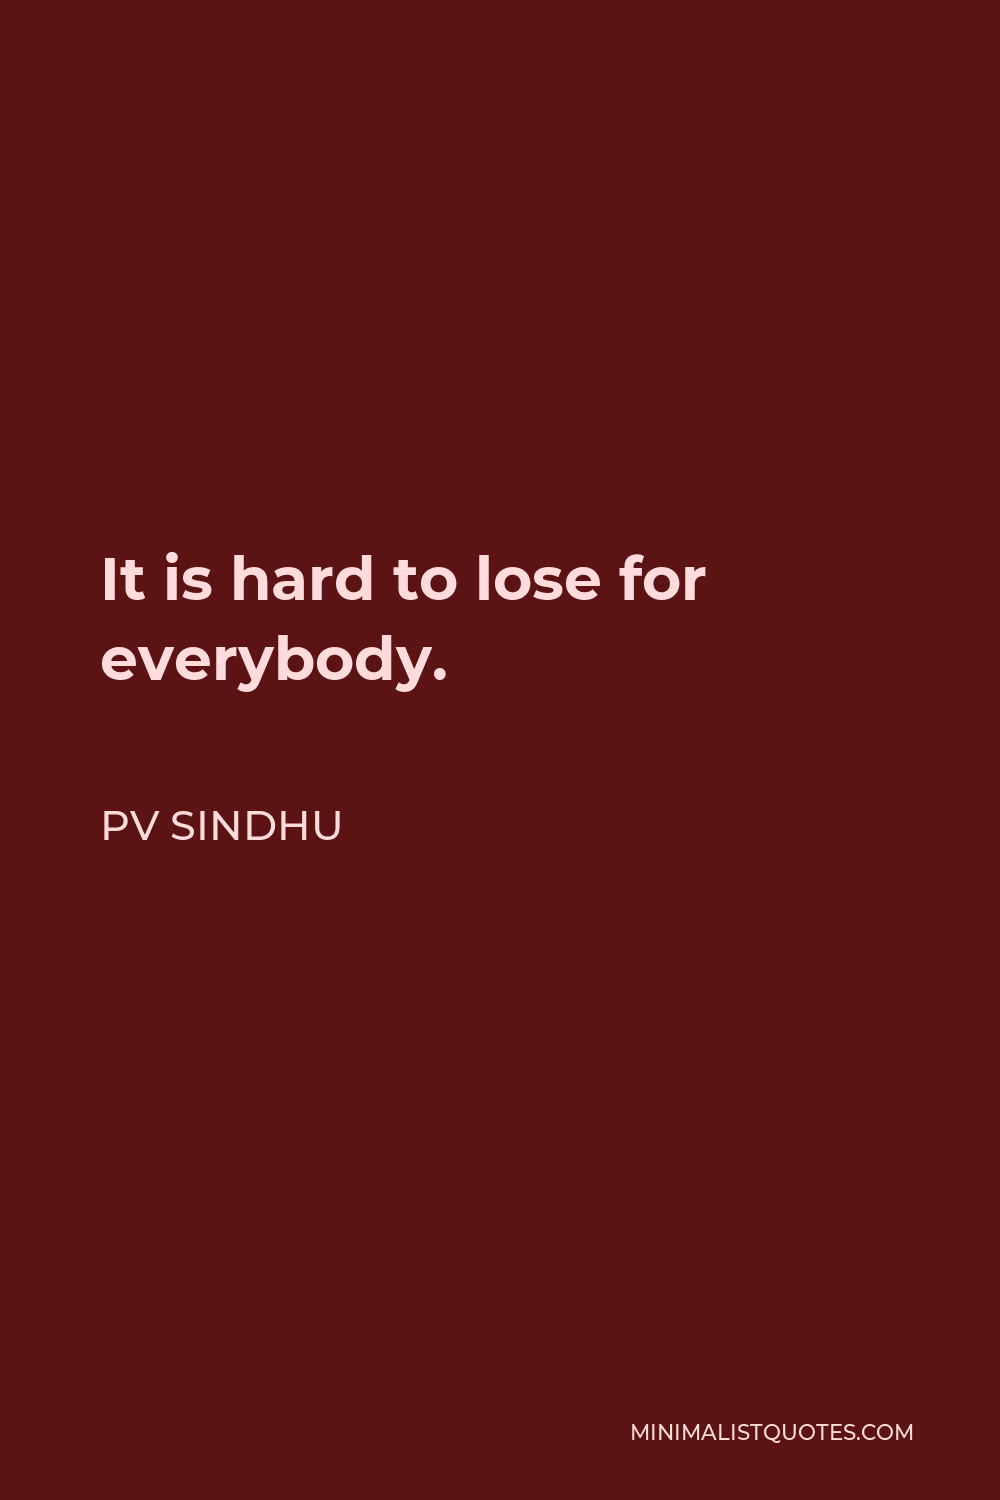 PV Sindhu Quote: It is hard to lose for everybody.